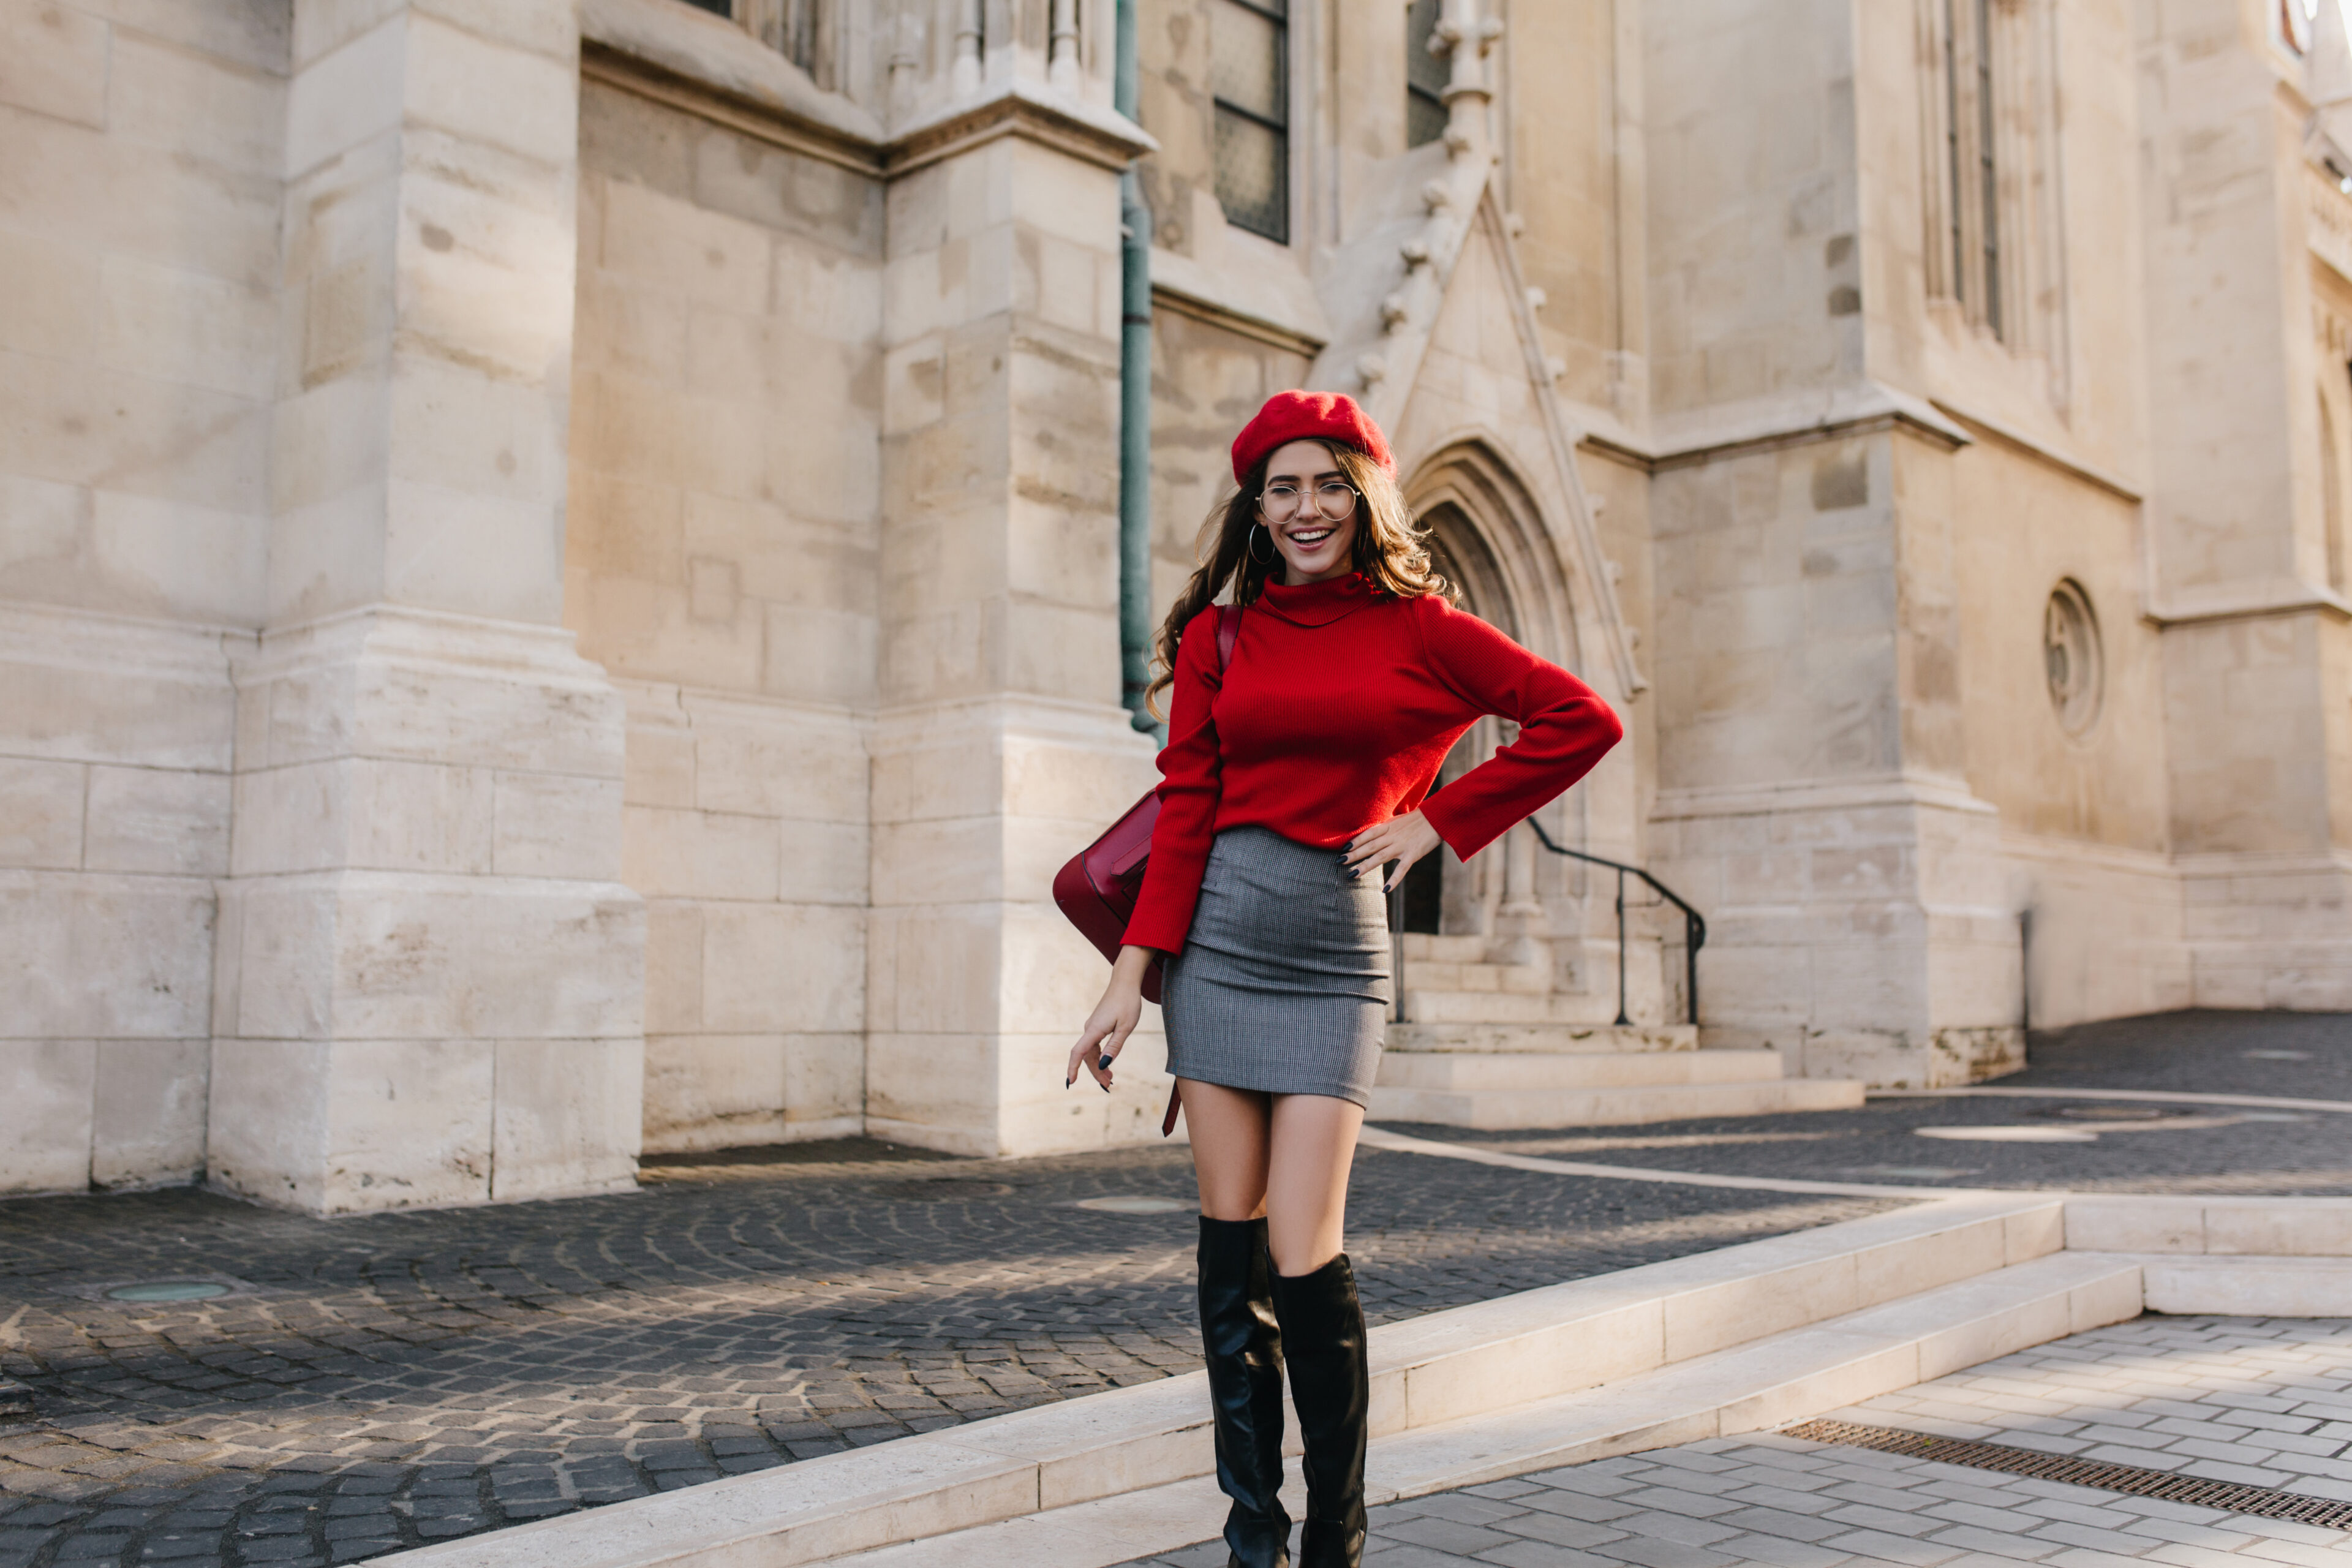  Turtleneck Sweater, Mini Skirt, and High Knee Boots 